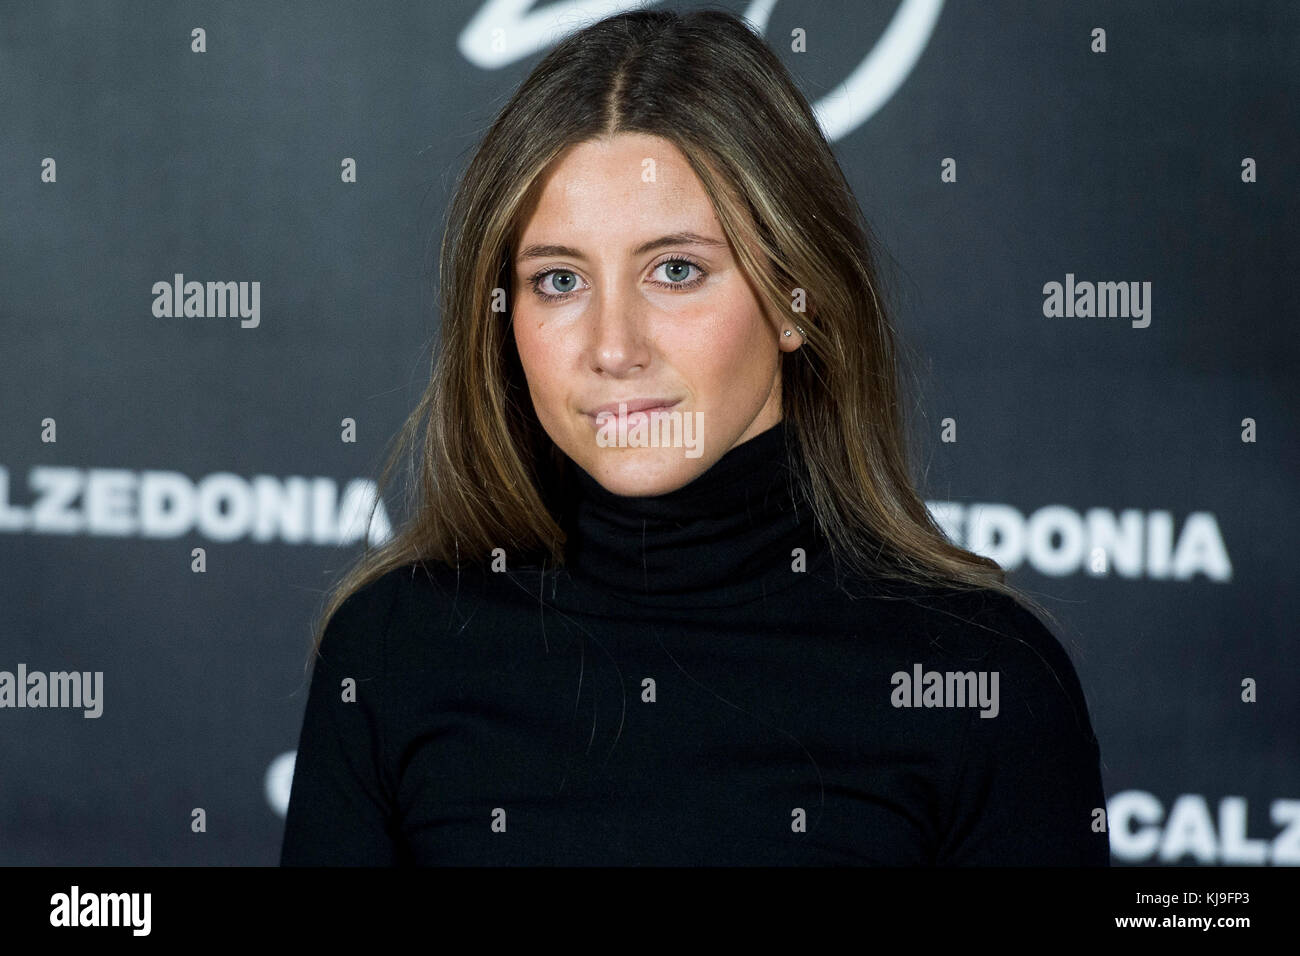 Madrid, Spain. 23rd Nov, 2017. attended for the 25th anniversary of the firm Calzedonia in Madrid on Thursday 23 November 2017. Credit: Gtres Información más Comuniación on line, S.L./Alamy Live News Stock Photo